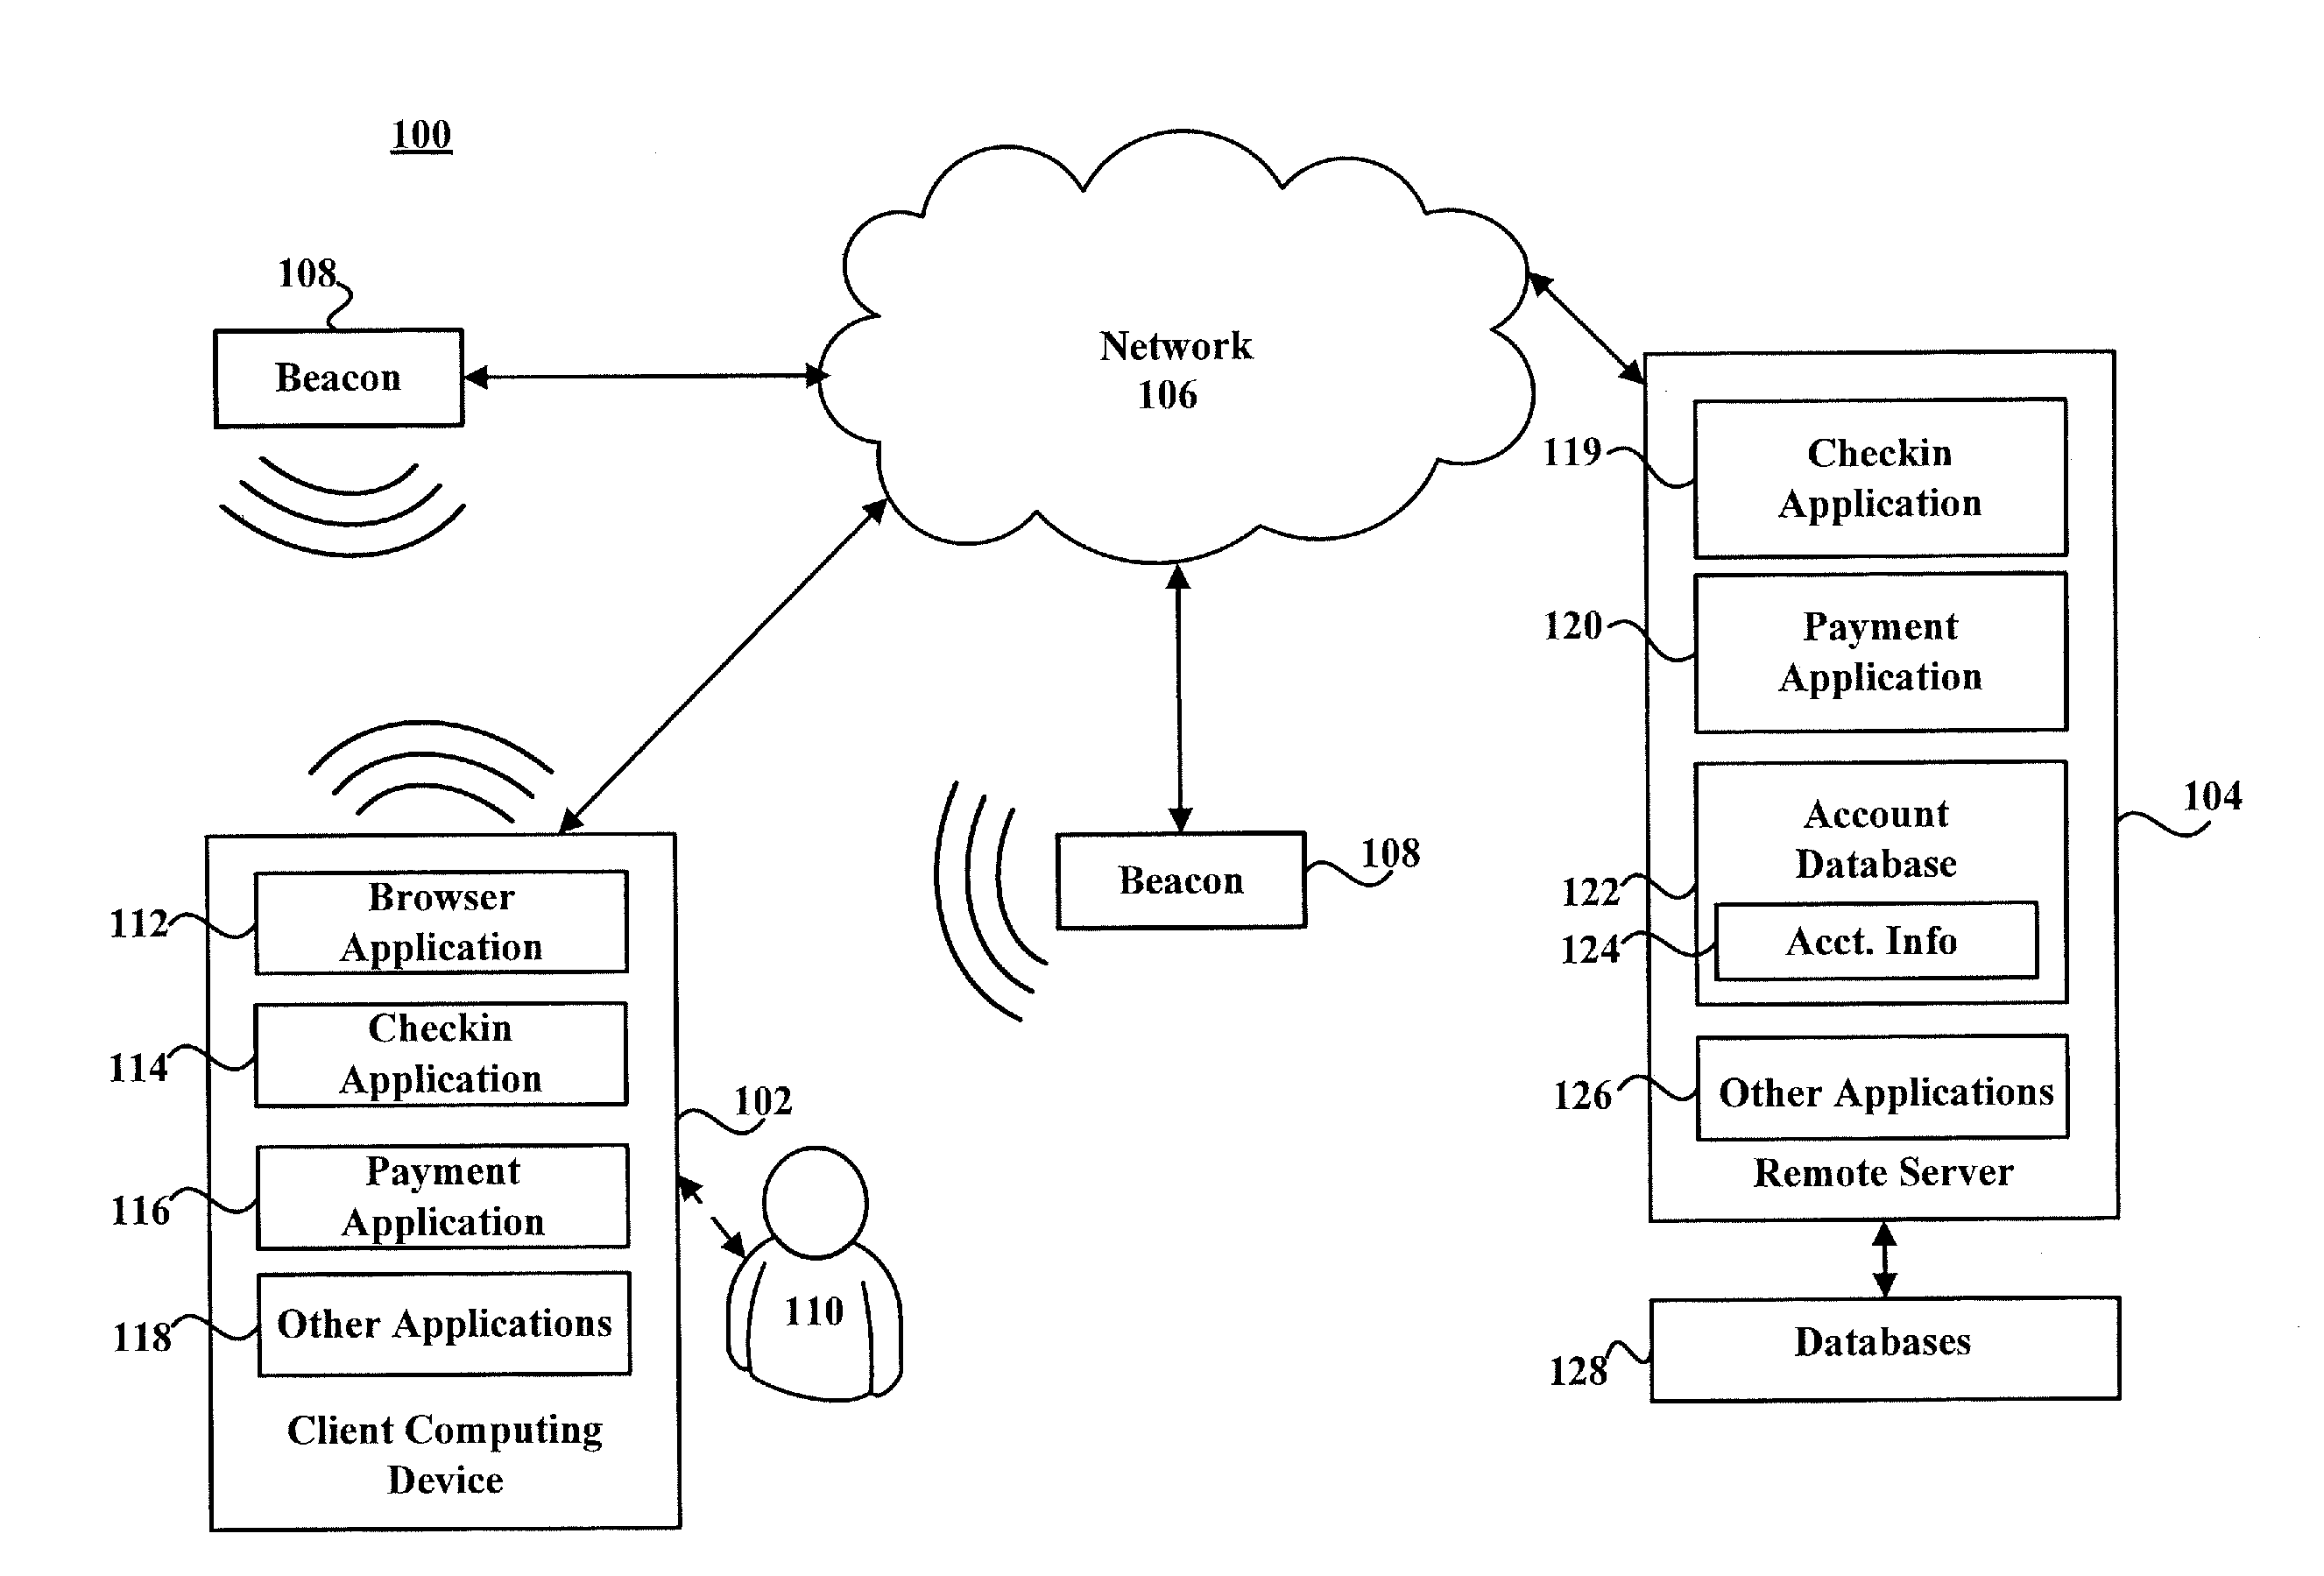 Bluetooth low energy (BLE) pre-check in